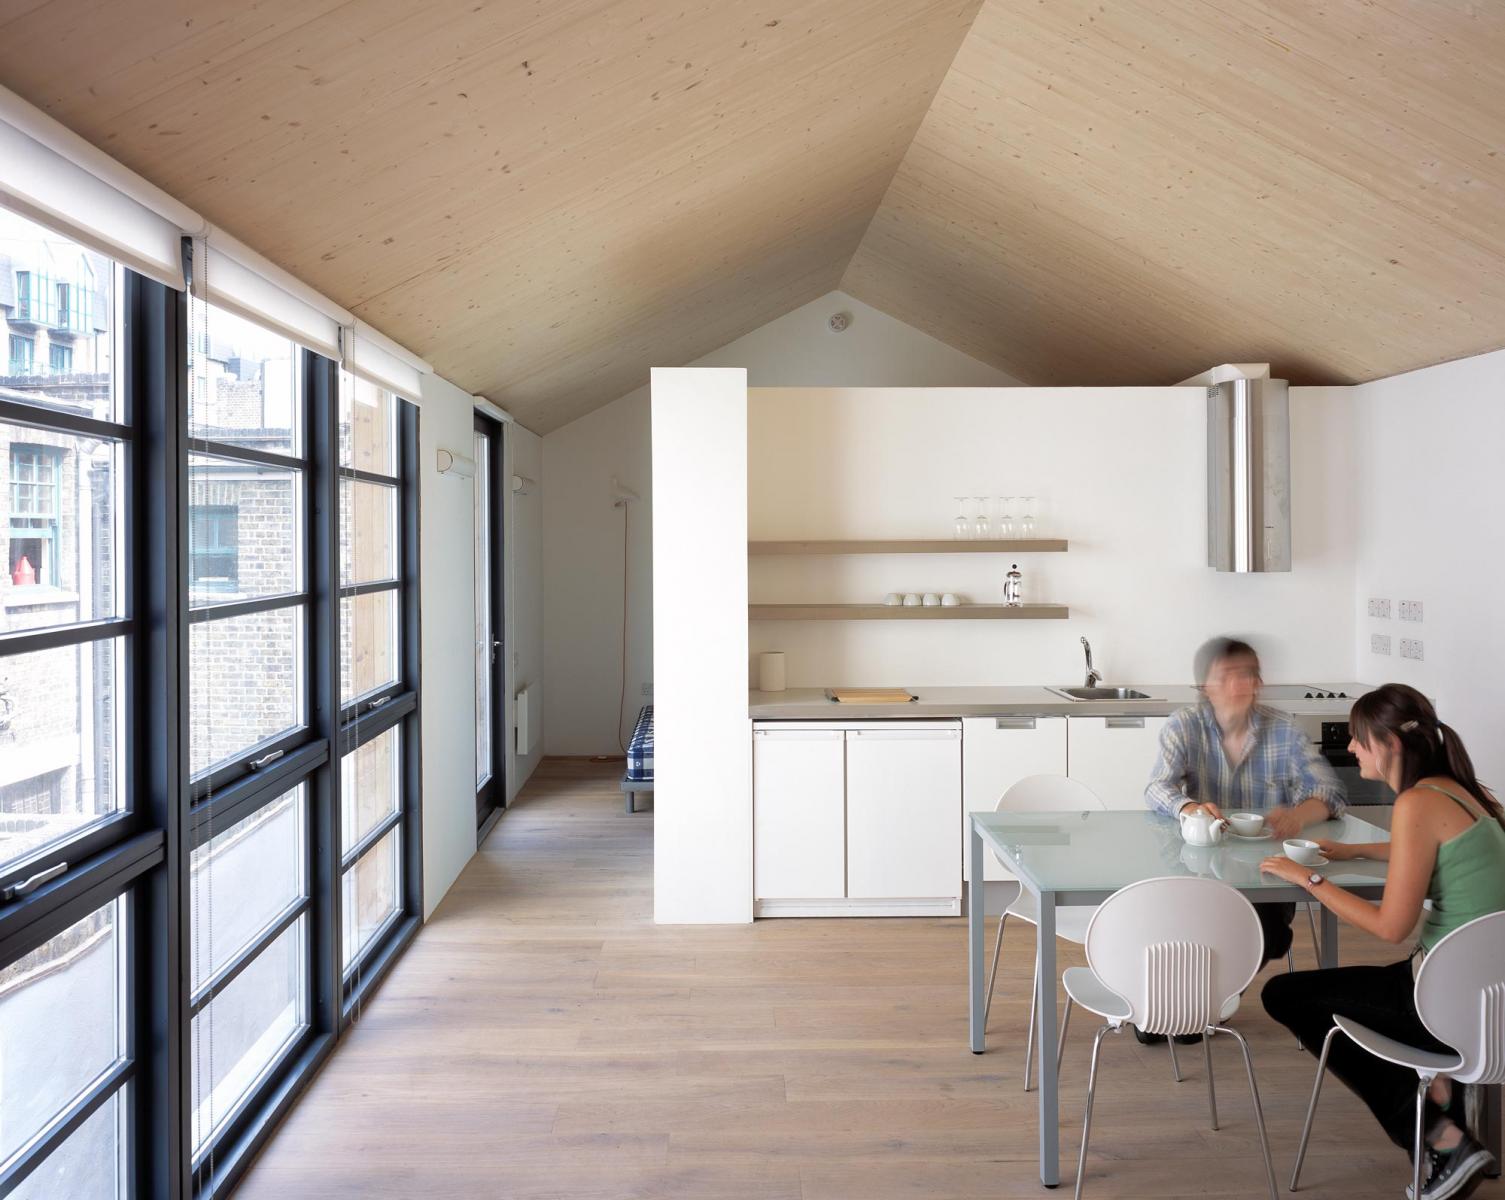 Carlisle Lane Flats, London - View of the Kitchen at exposed timber roof